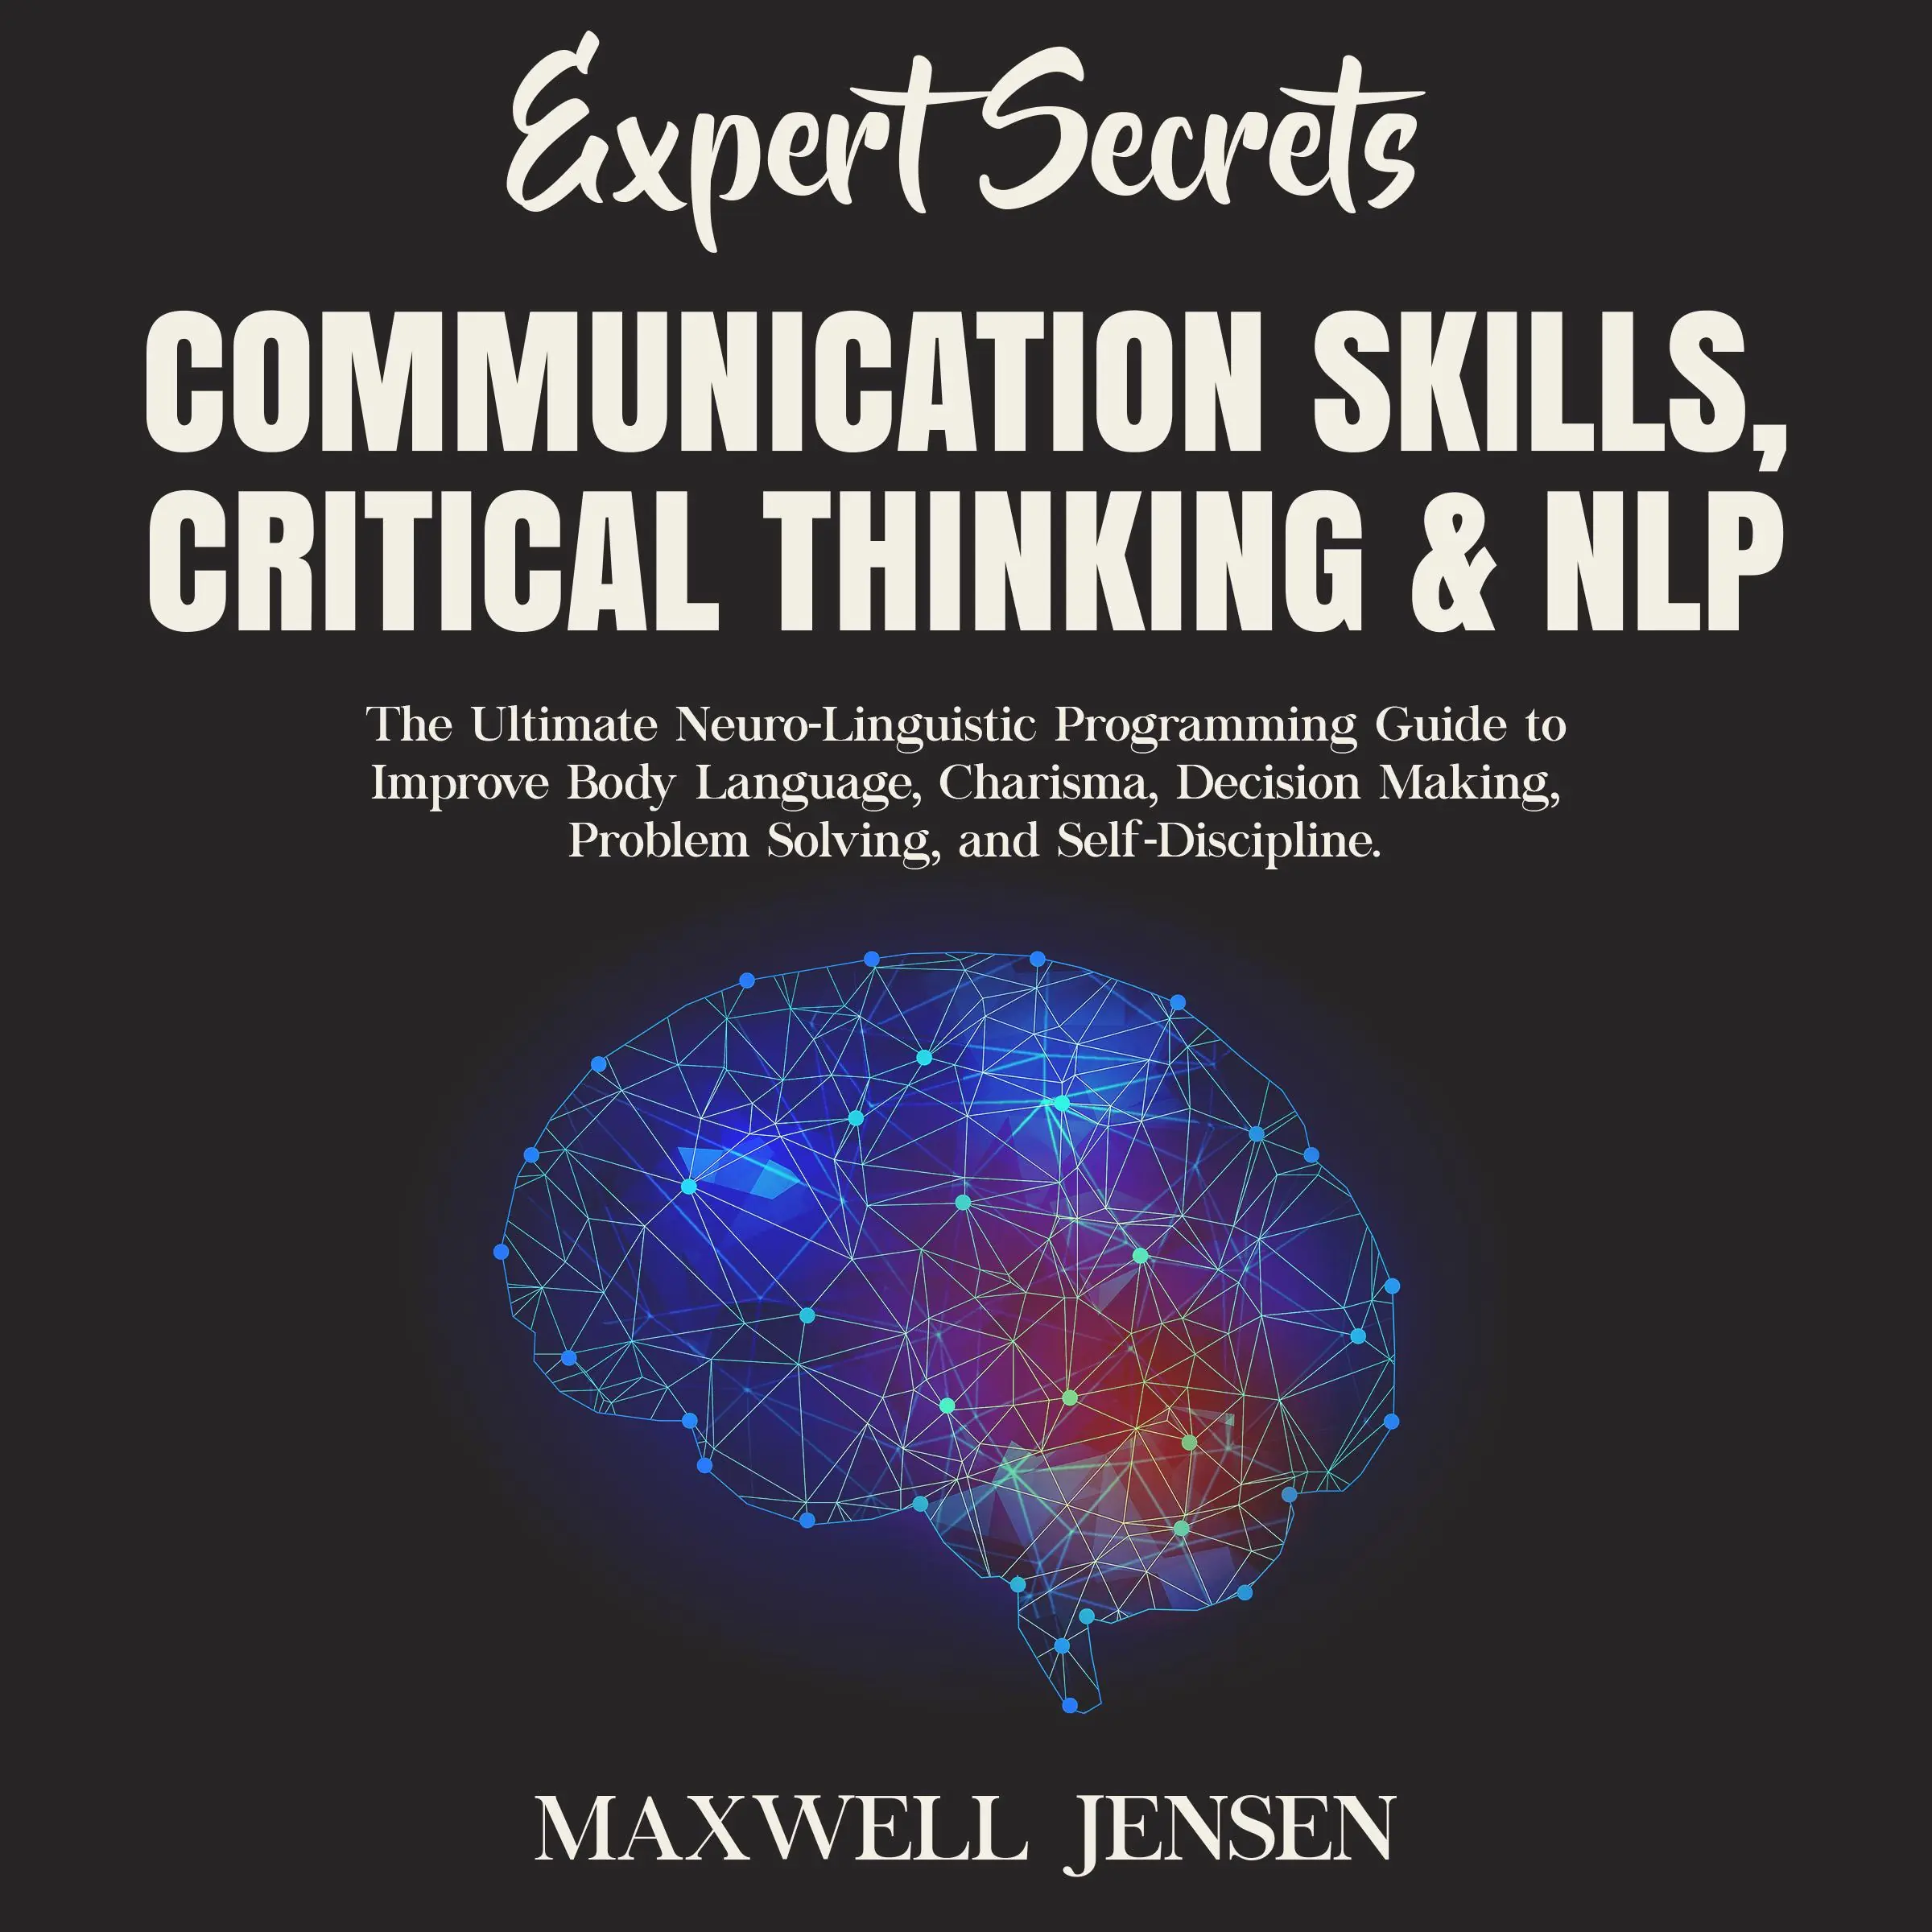 Expert Secrets – Communication Skills, Critical Thinking & NLP: The Ultimate Neuro-Linguistic Programming Guide to Improve Body Language, Charisma, Decision Making, Problem Solving, and Self-Discipline Audiobook by Maxwell Jensen